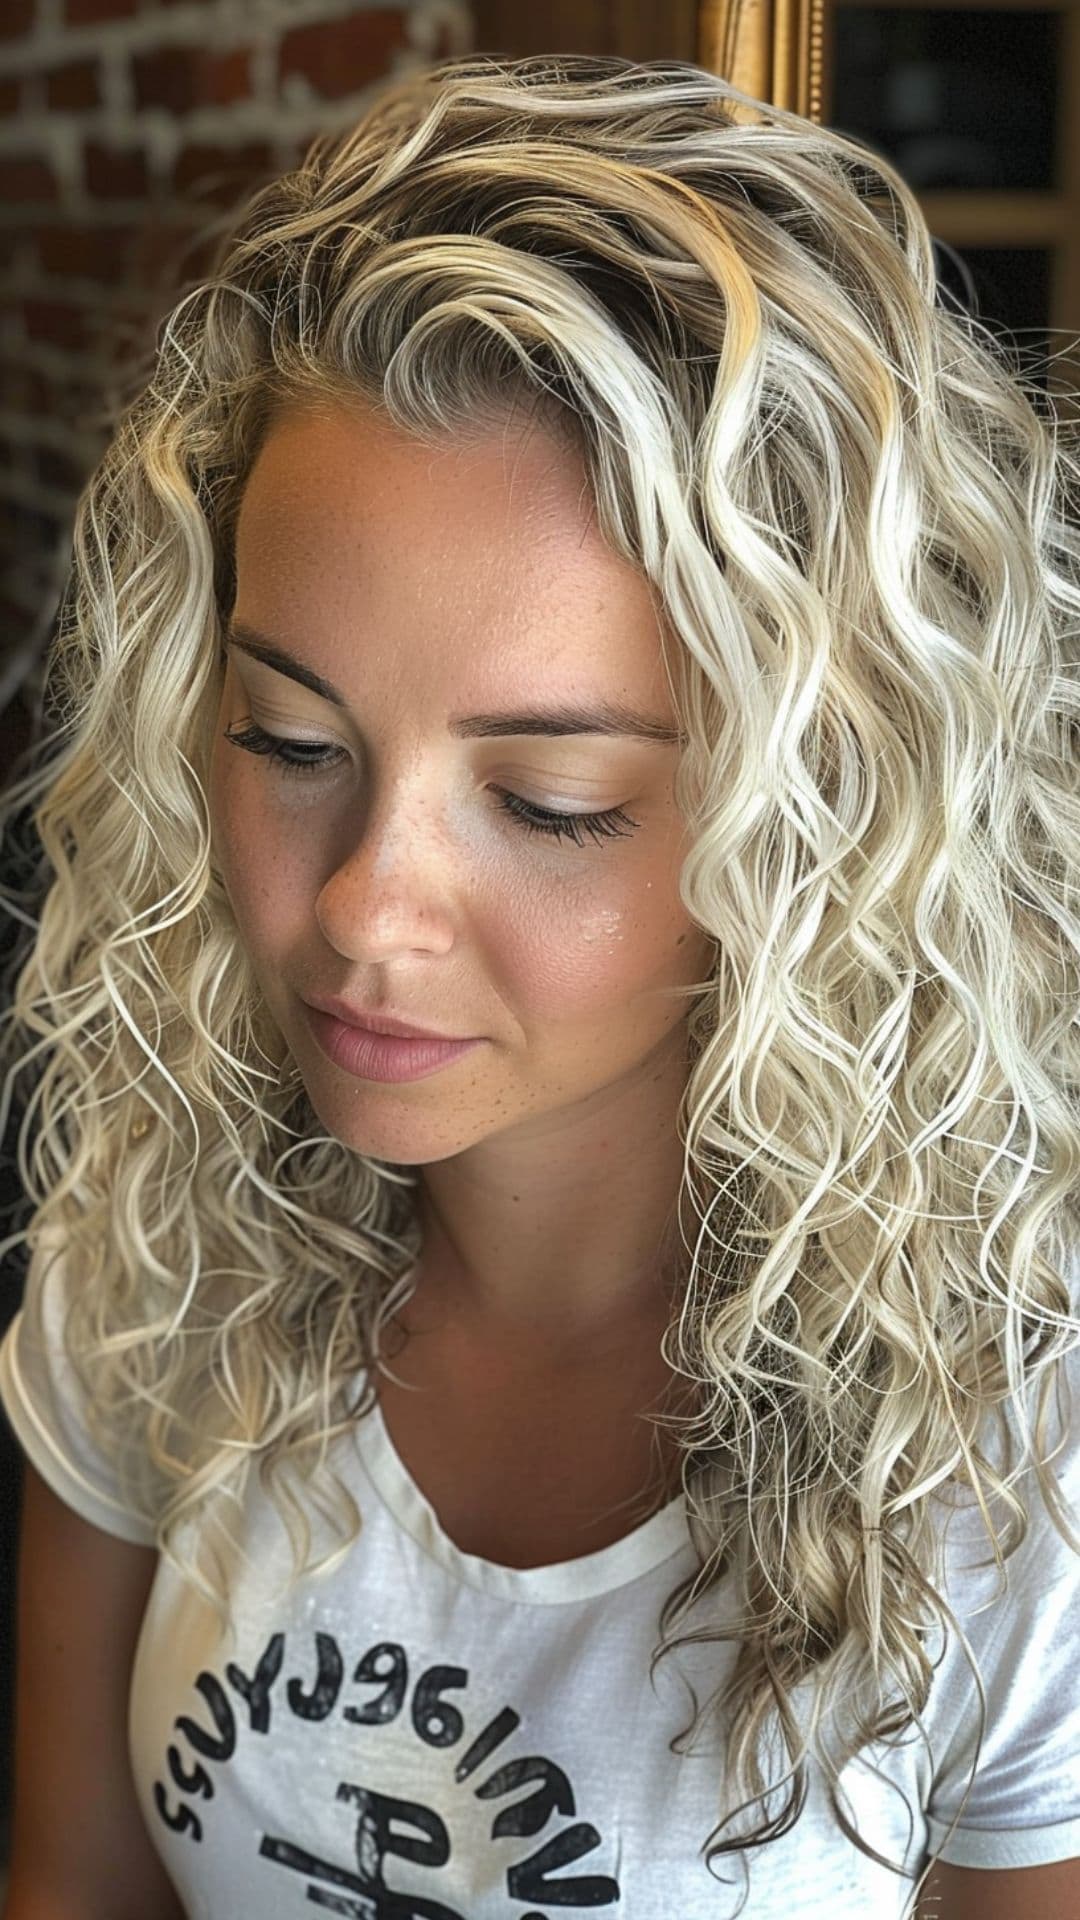 A woman modelling an icy platinum blonde curly hair.